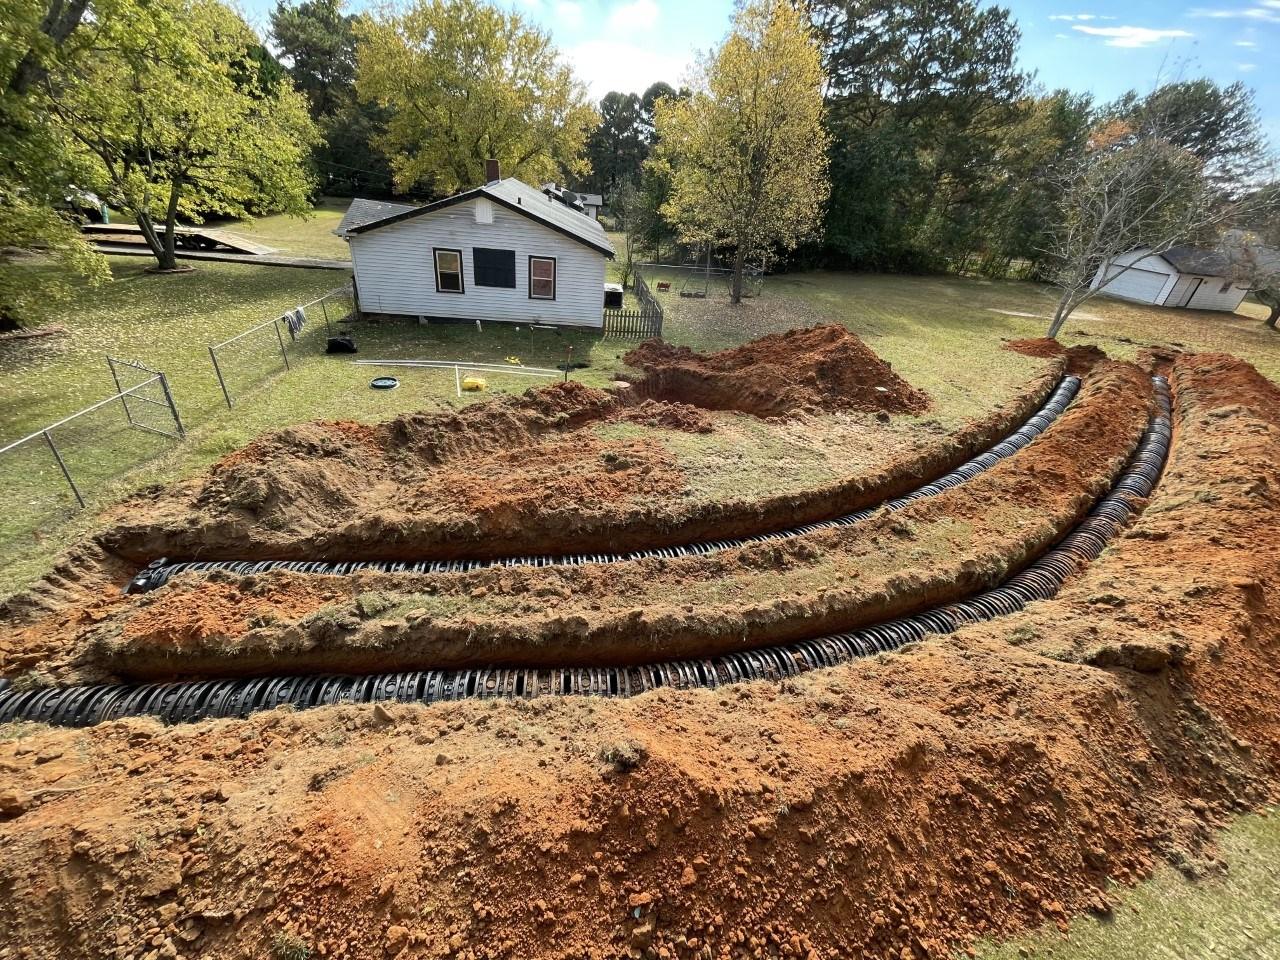 Drain lines installed by Bynum Septic